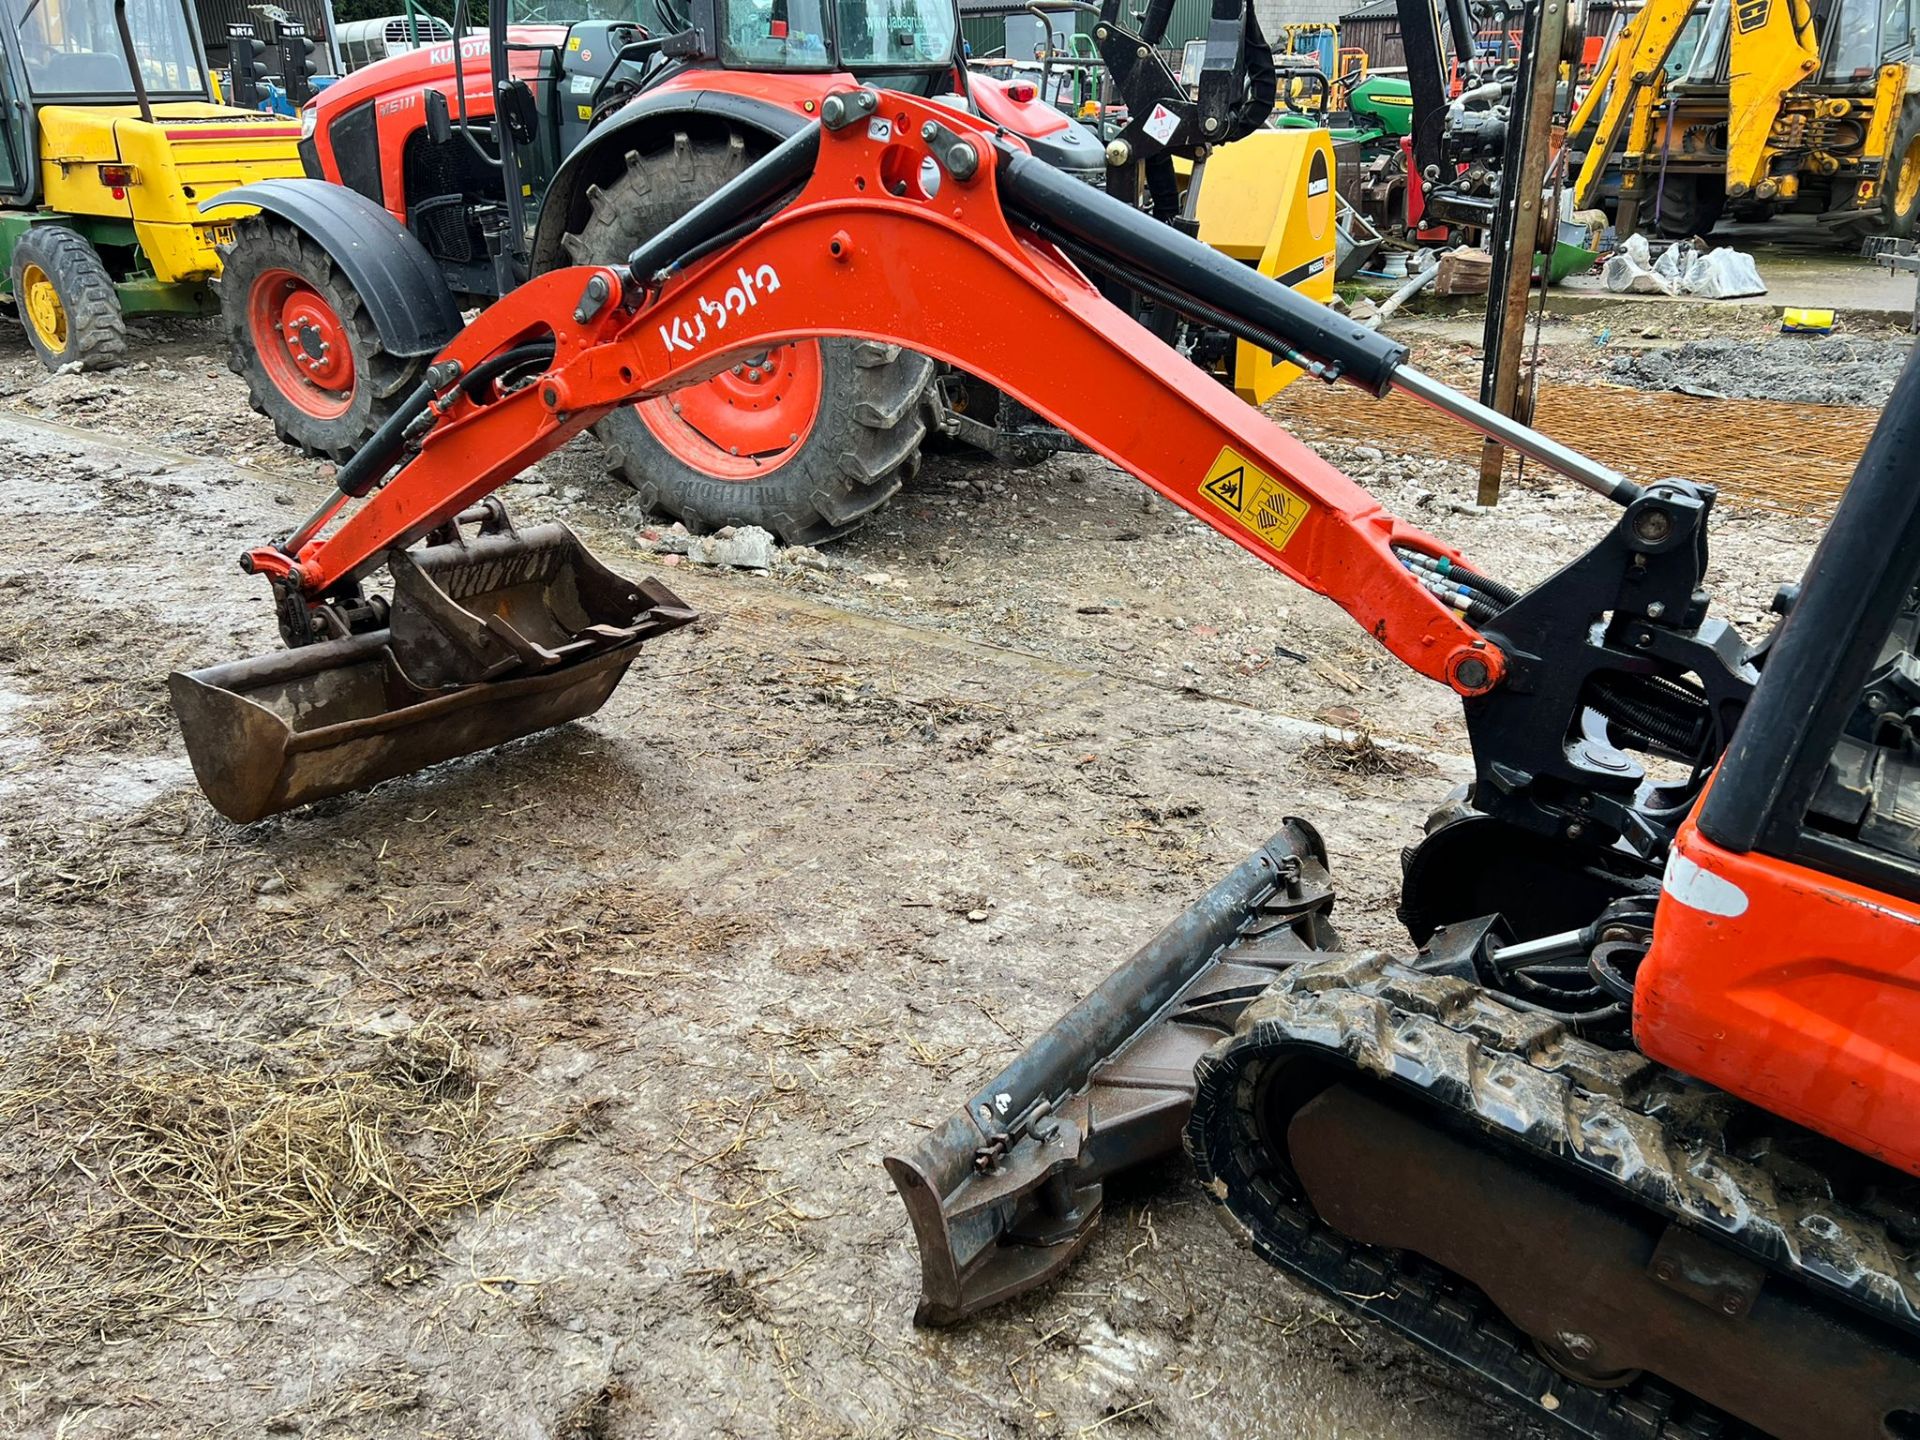 2018 KUBOTA KX018-4 1.8 TON MINI DIGGER, RUNS DRIVES AND DIGS, SHOWING A LOW 1681 HOURS - Image 8 of 20